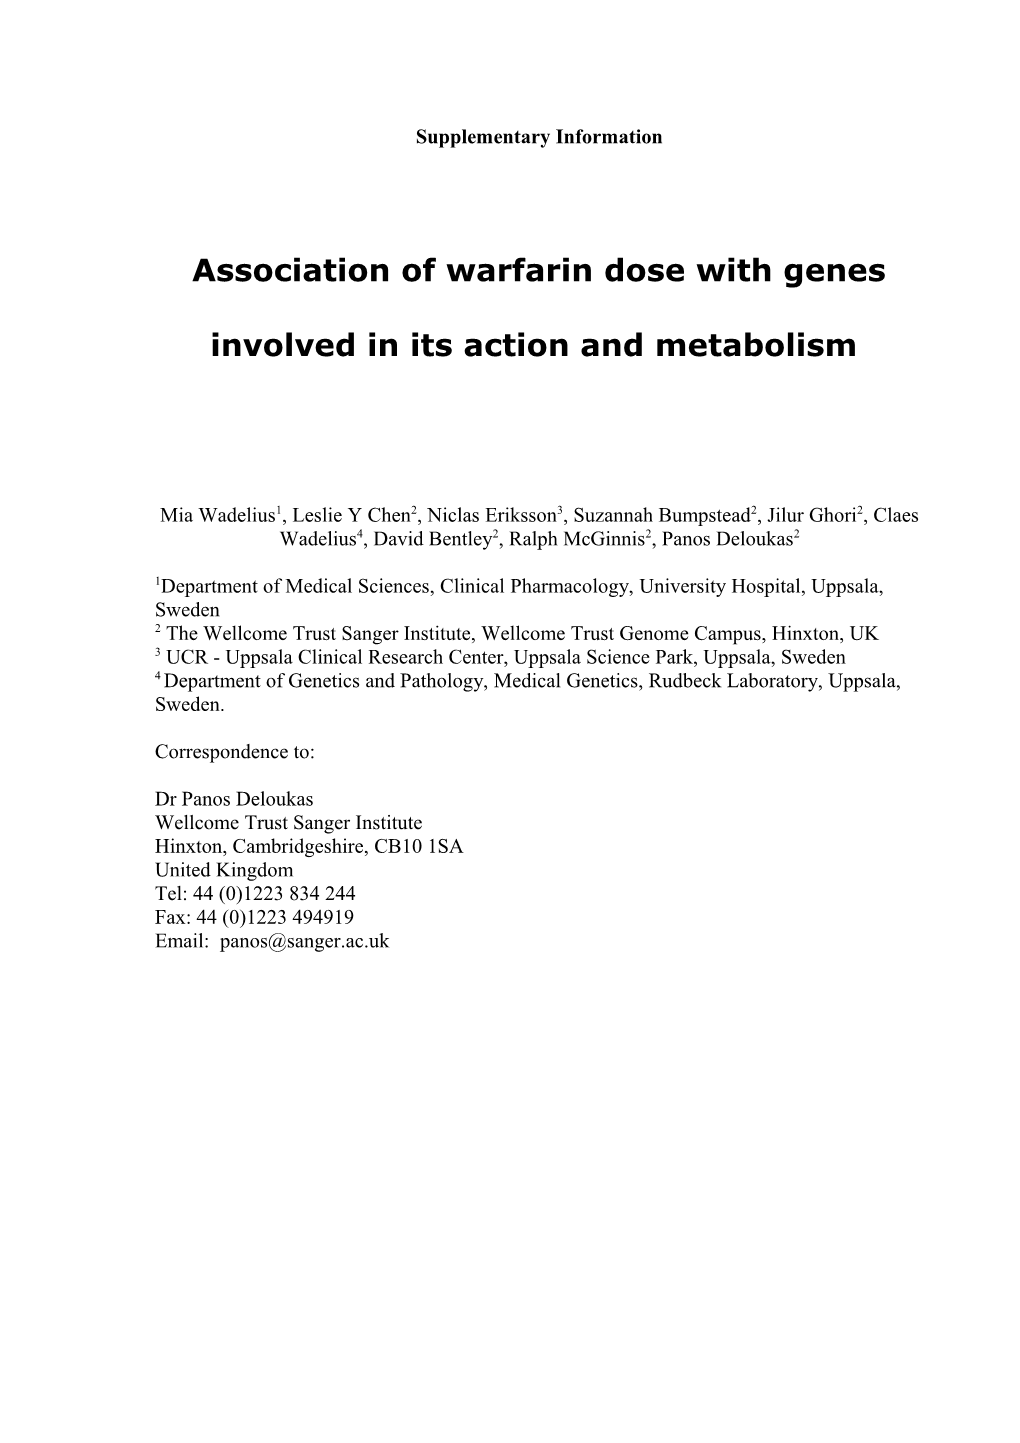 Testing Association of Warfarin Dose with Variation in Genes Critically Involved in Warfarin